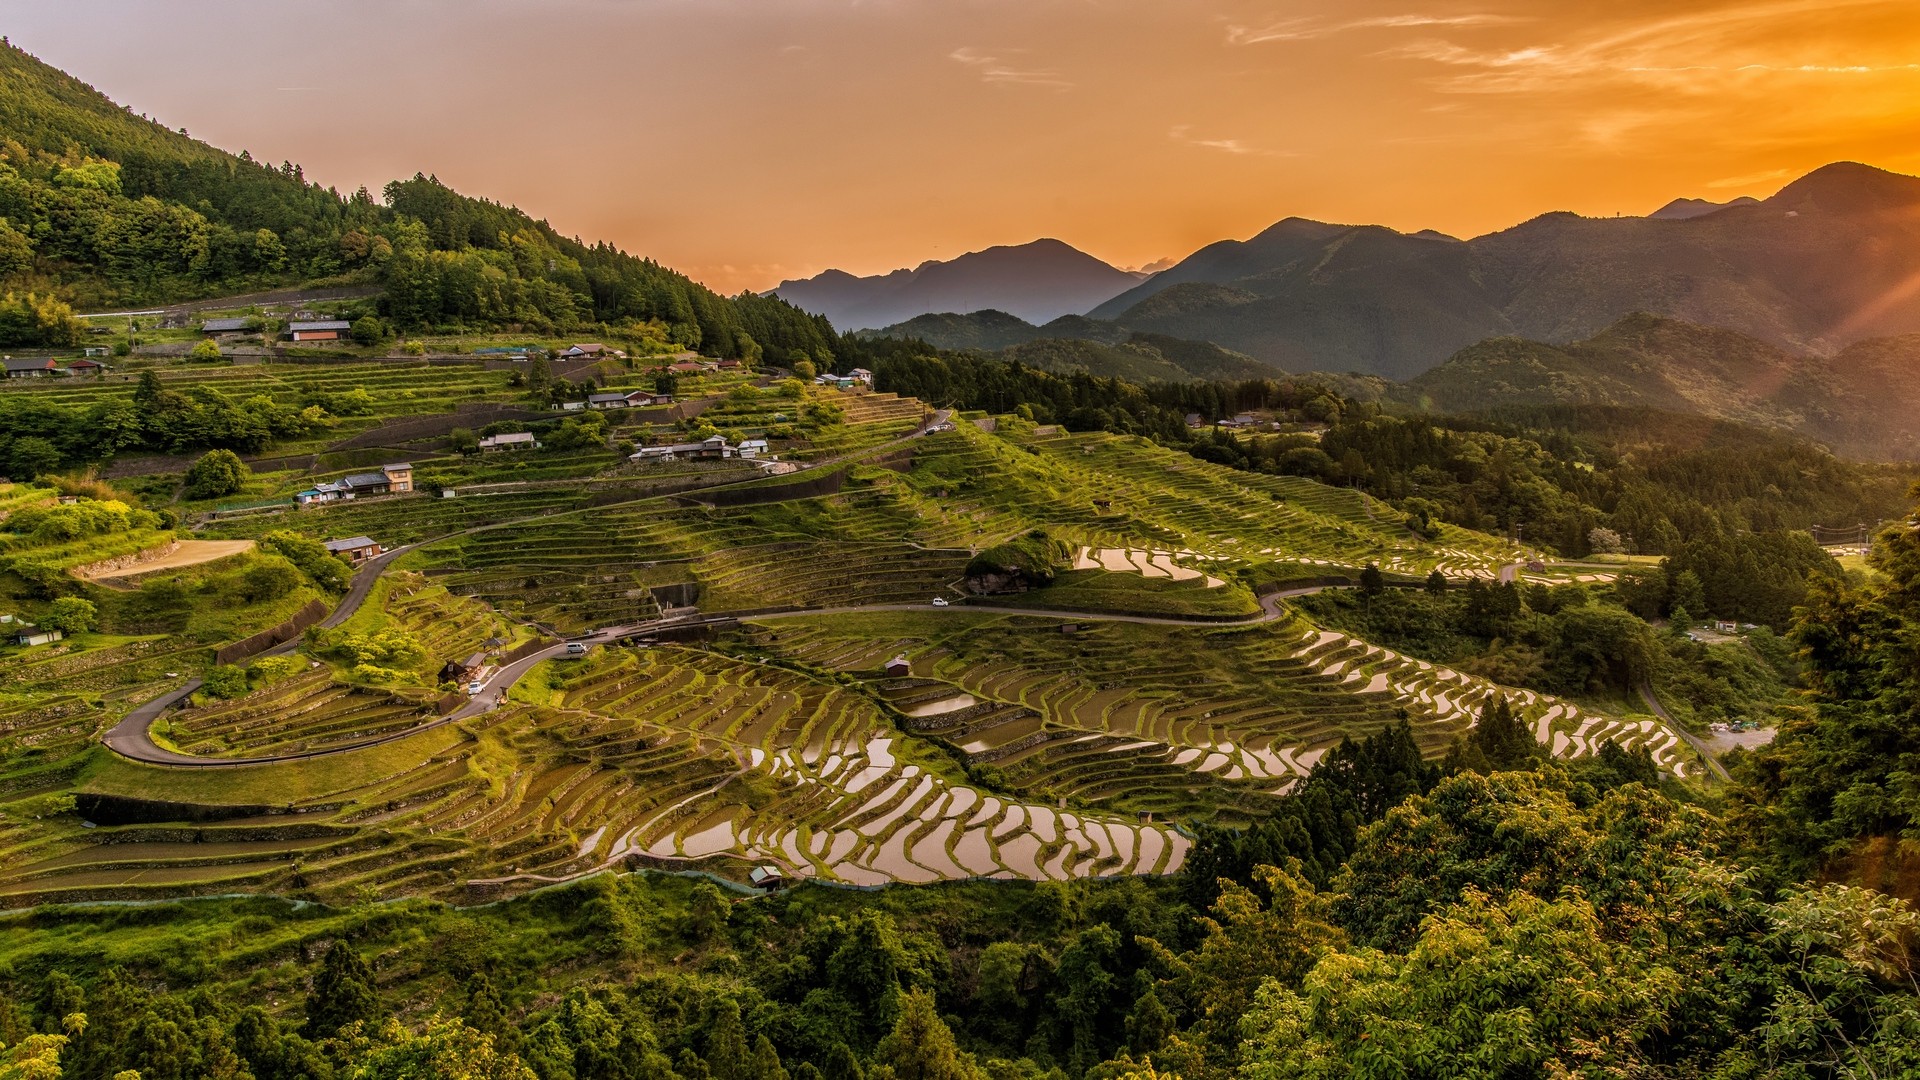 1920x1080 wallpapers: rice fields, hills, structure, cultivation (image)